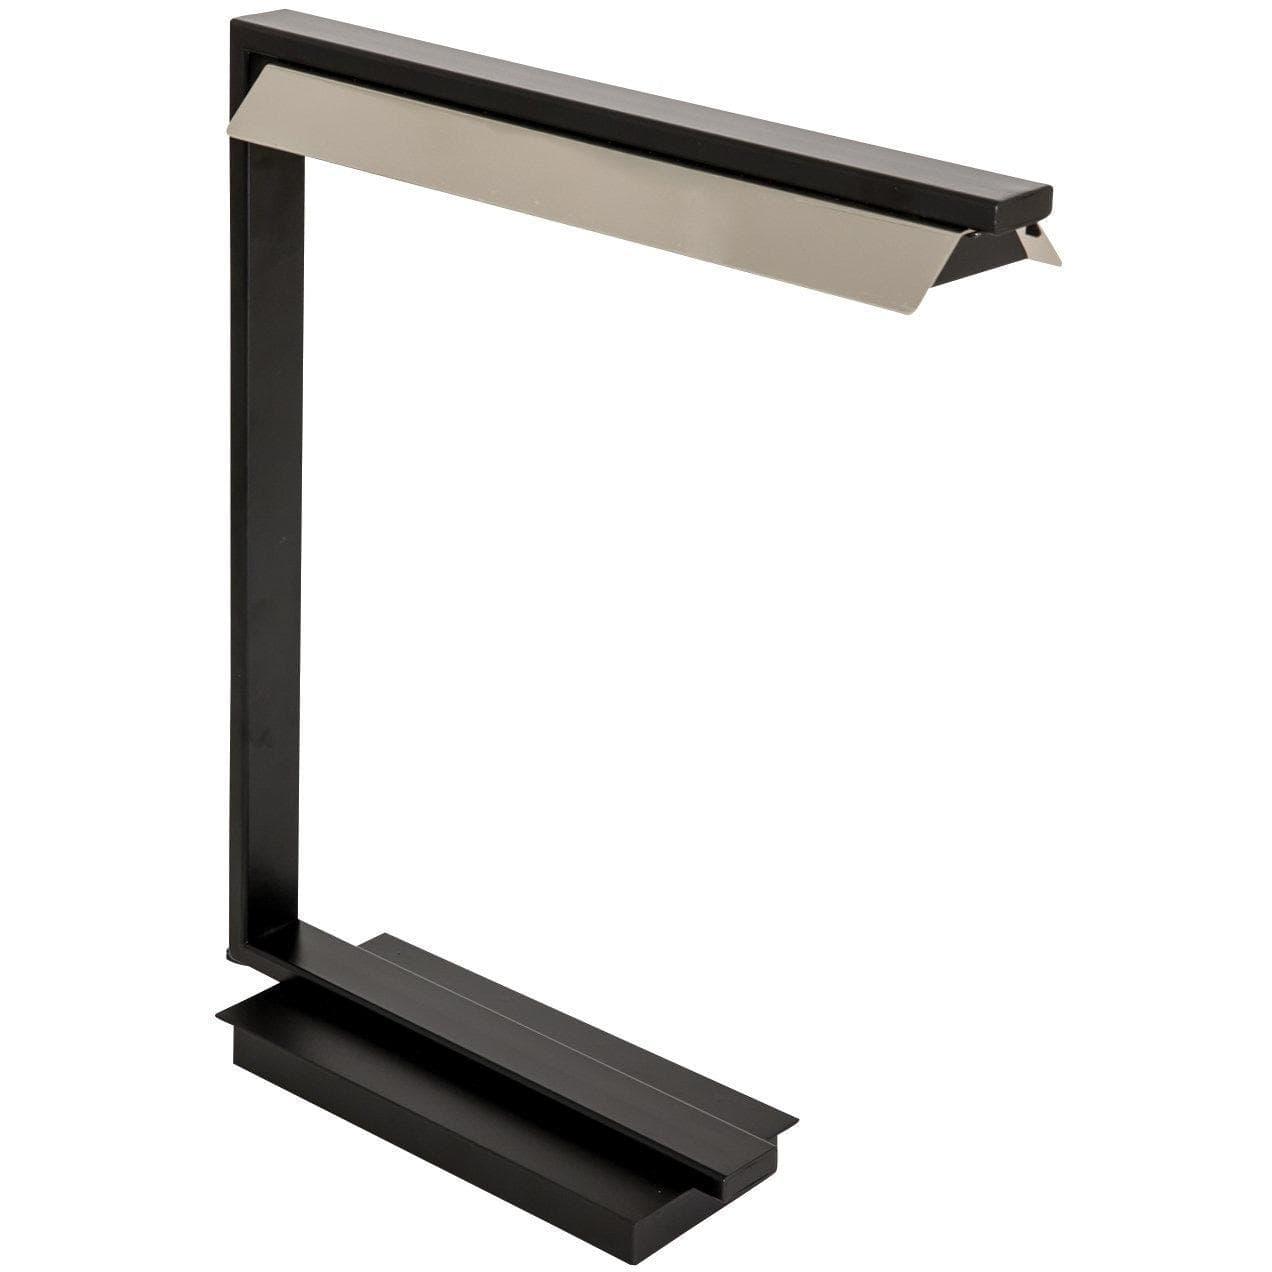 House of Troy - Jay LED Table Lamp - JLED550-BLK | Montreal Lighting & Hardware